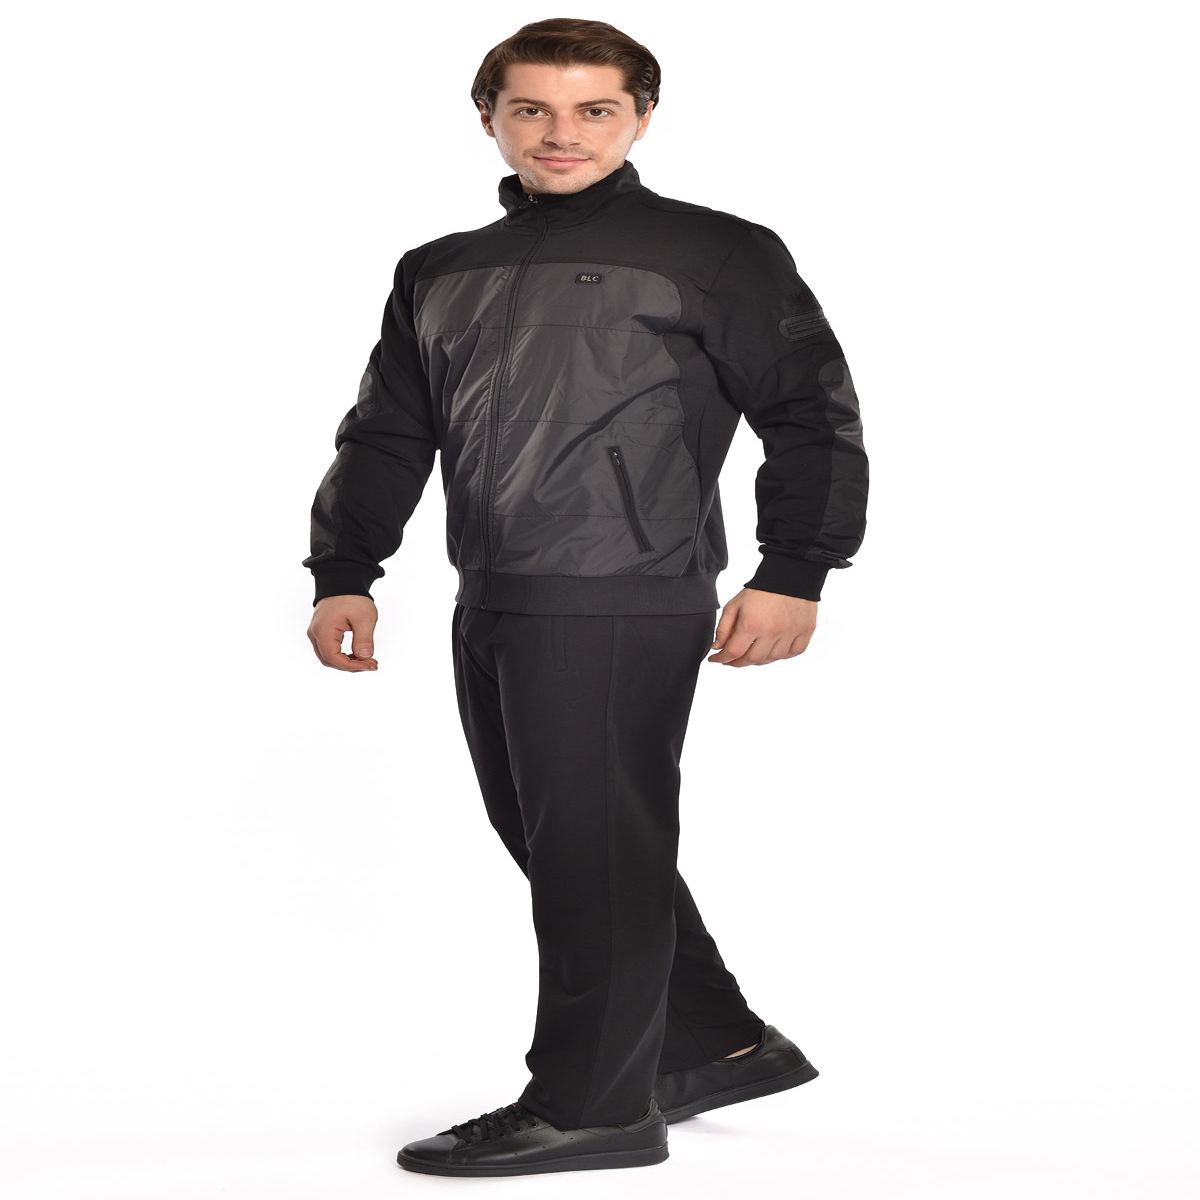 BILCEE MEN'S TRACKSUIT FOR TRANING-18MA01W9417-1-2001